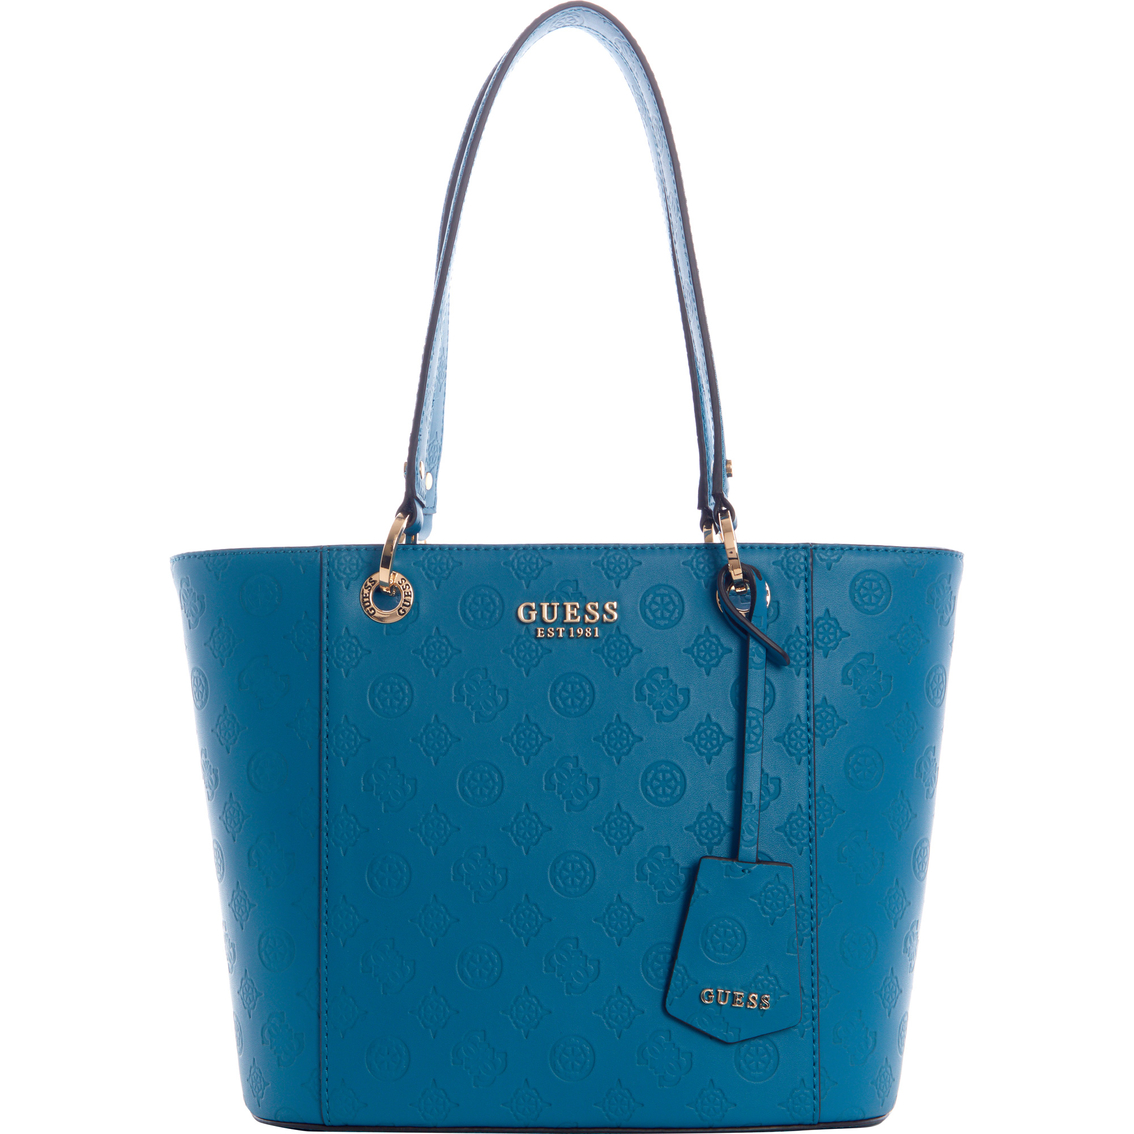 Guess Noelle Tote